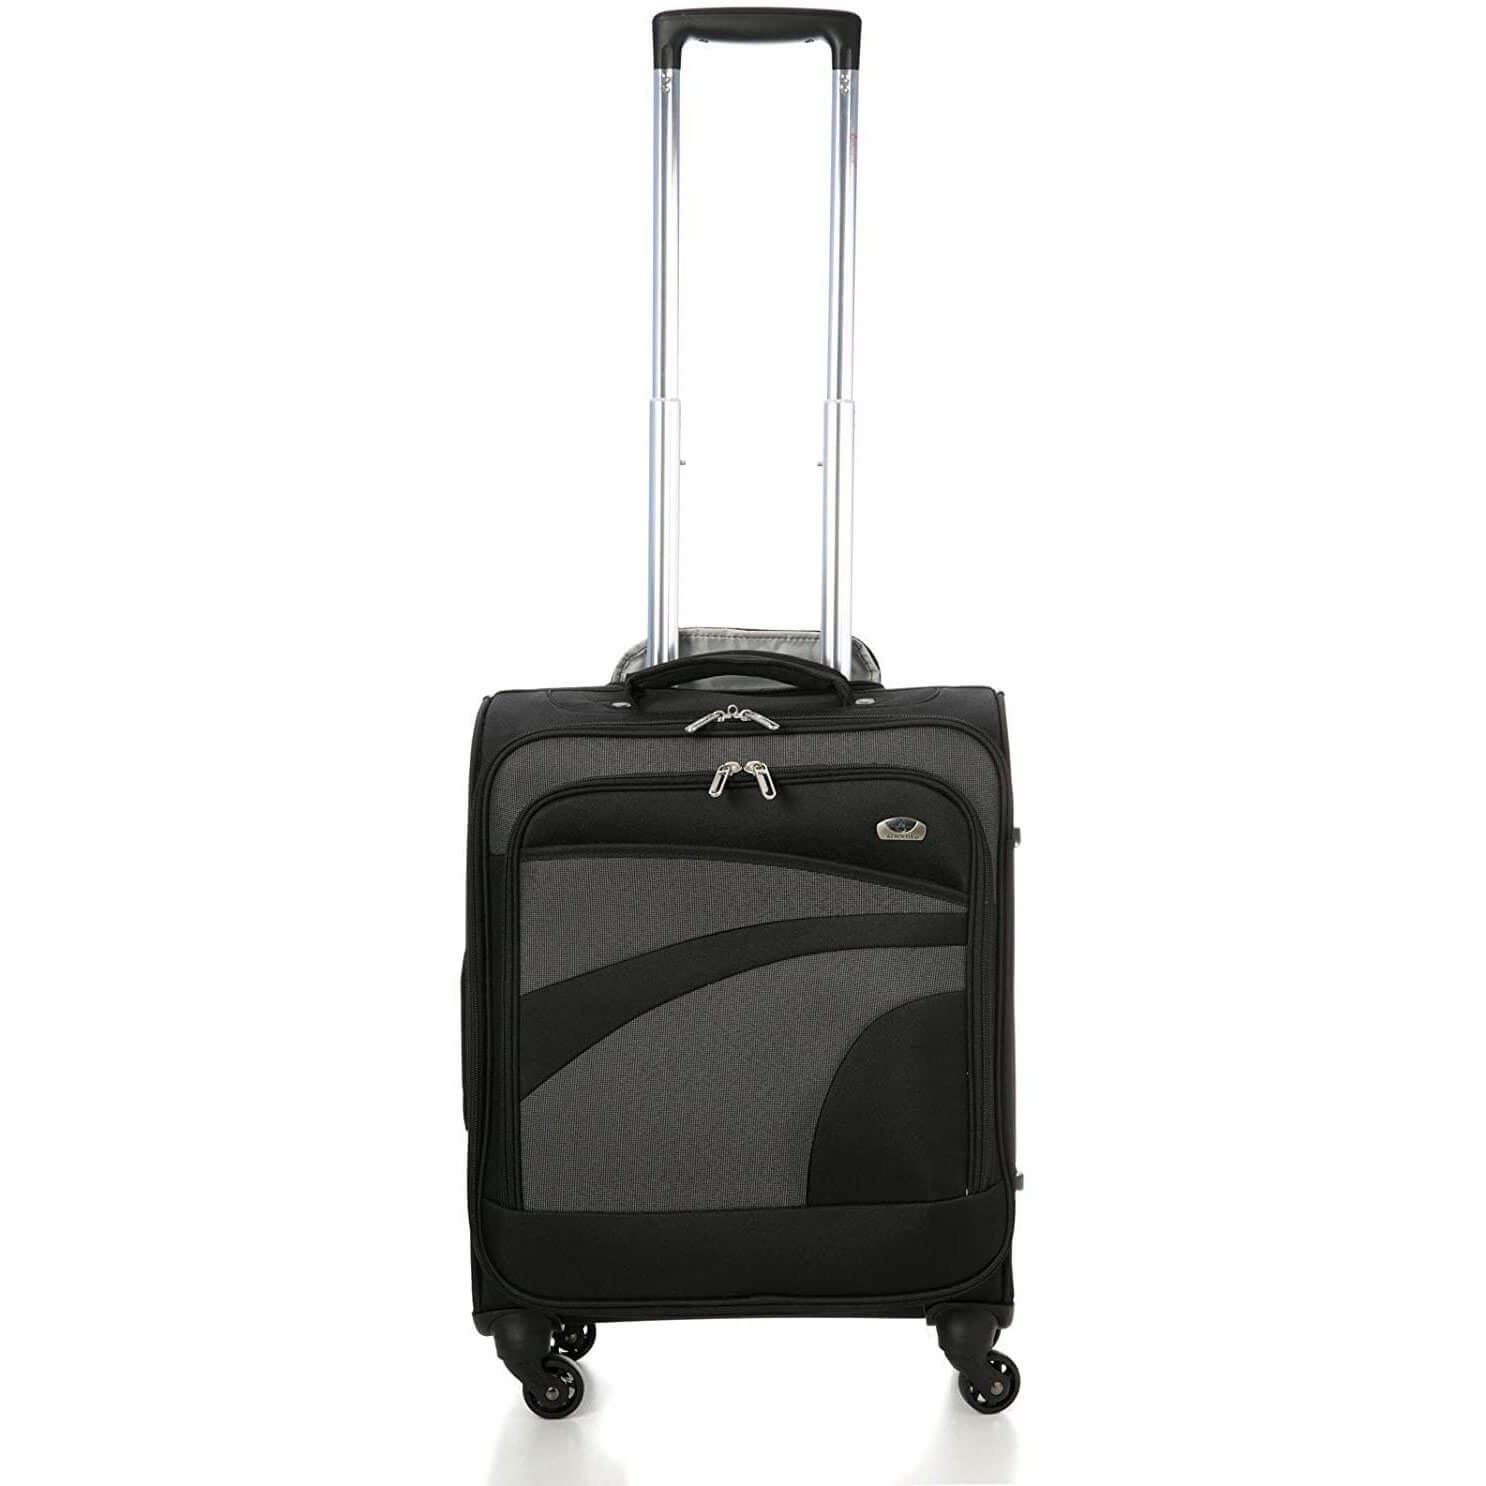 Aerolite 55x40x20 Ryanair Maximum Allowance 38L Lightweight Travel Carry On Hand Cabin Luggage Suitcase with 4 Wheels - Also Approved for Easyjet, British Airways, Jet2 and More (Black/Grey)